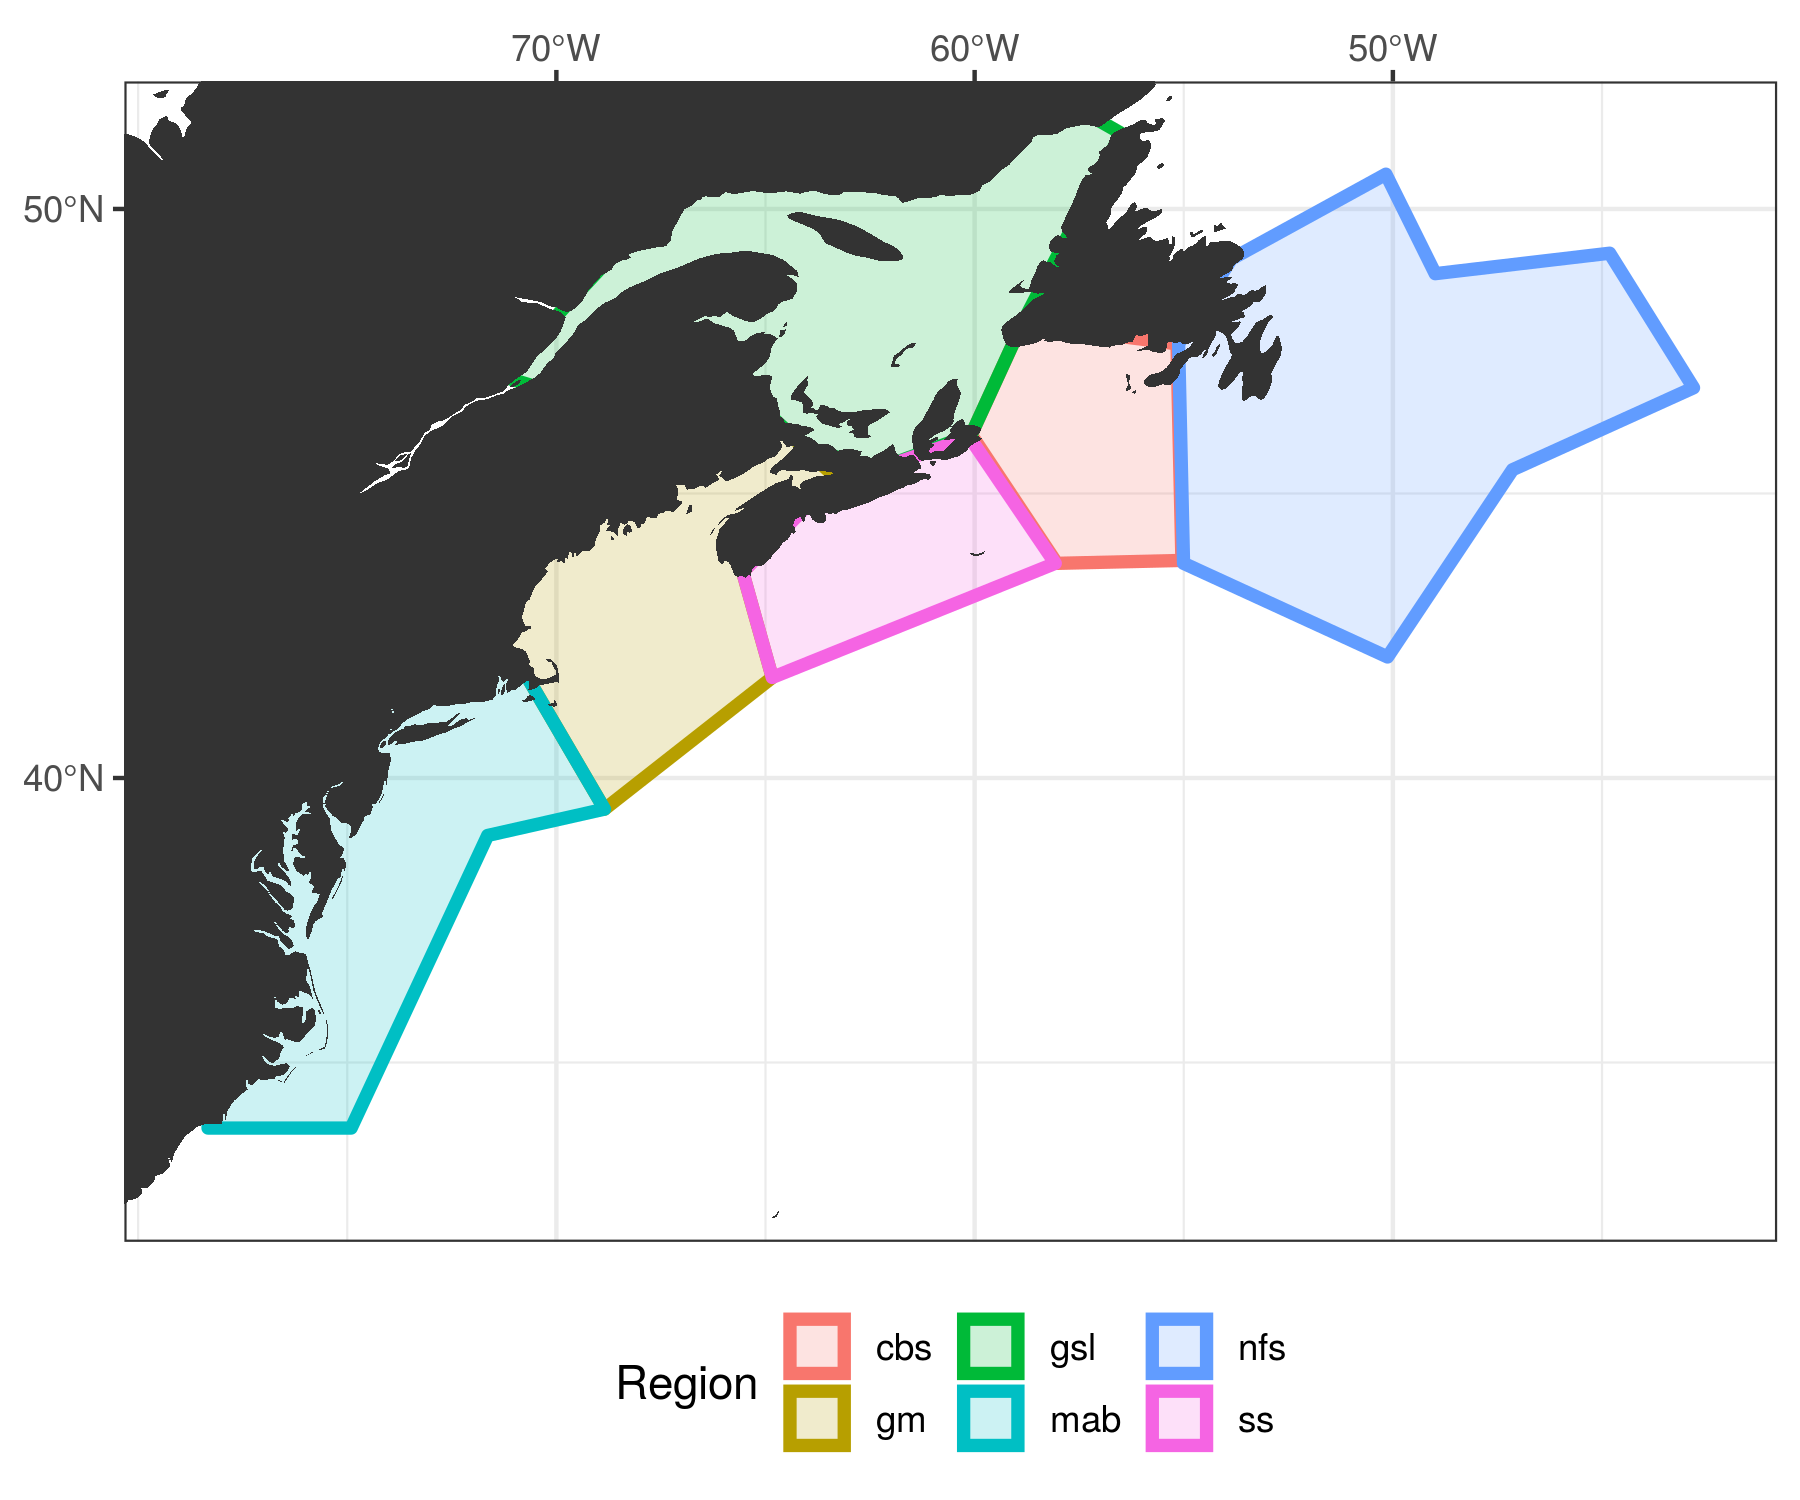 The regions of the coast were devided up by their temperature and salinity regimes based on work by @Richaud2016. The regions were furthered divided into sub-regions based on their depth.